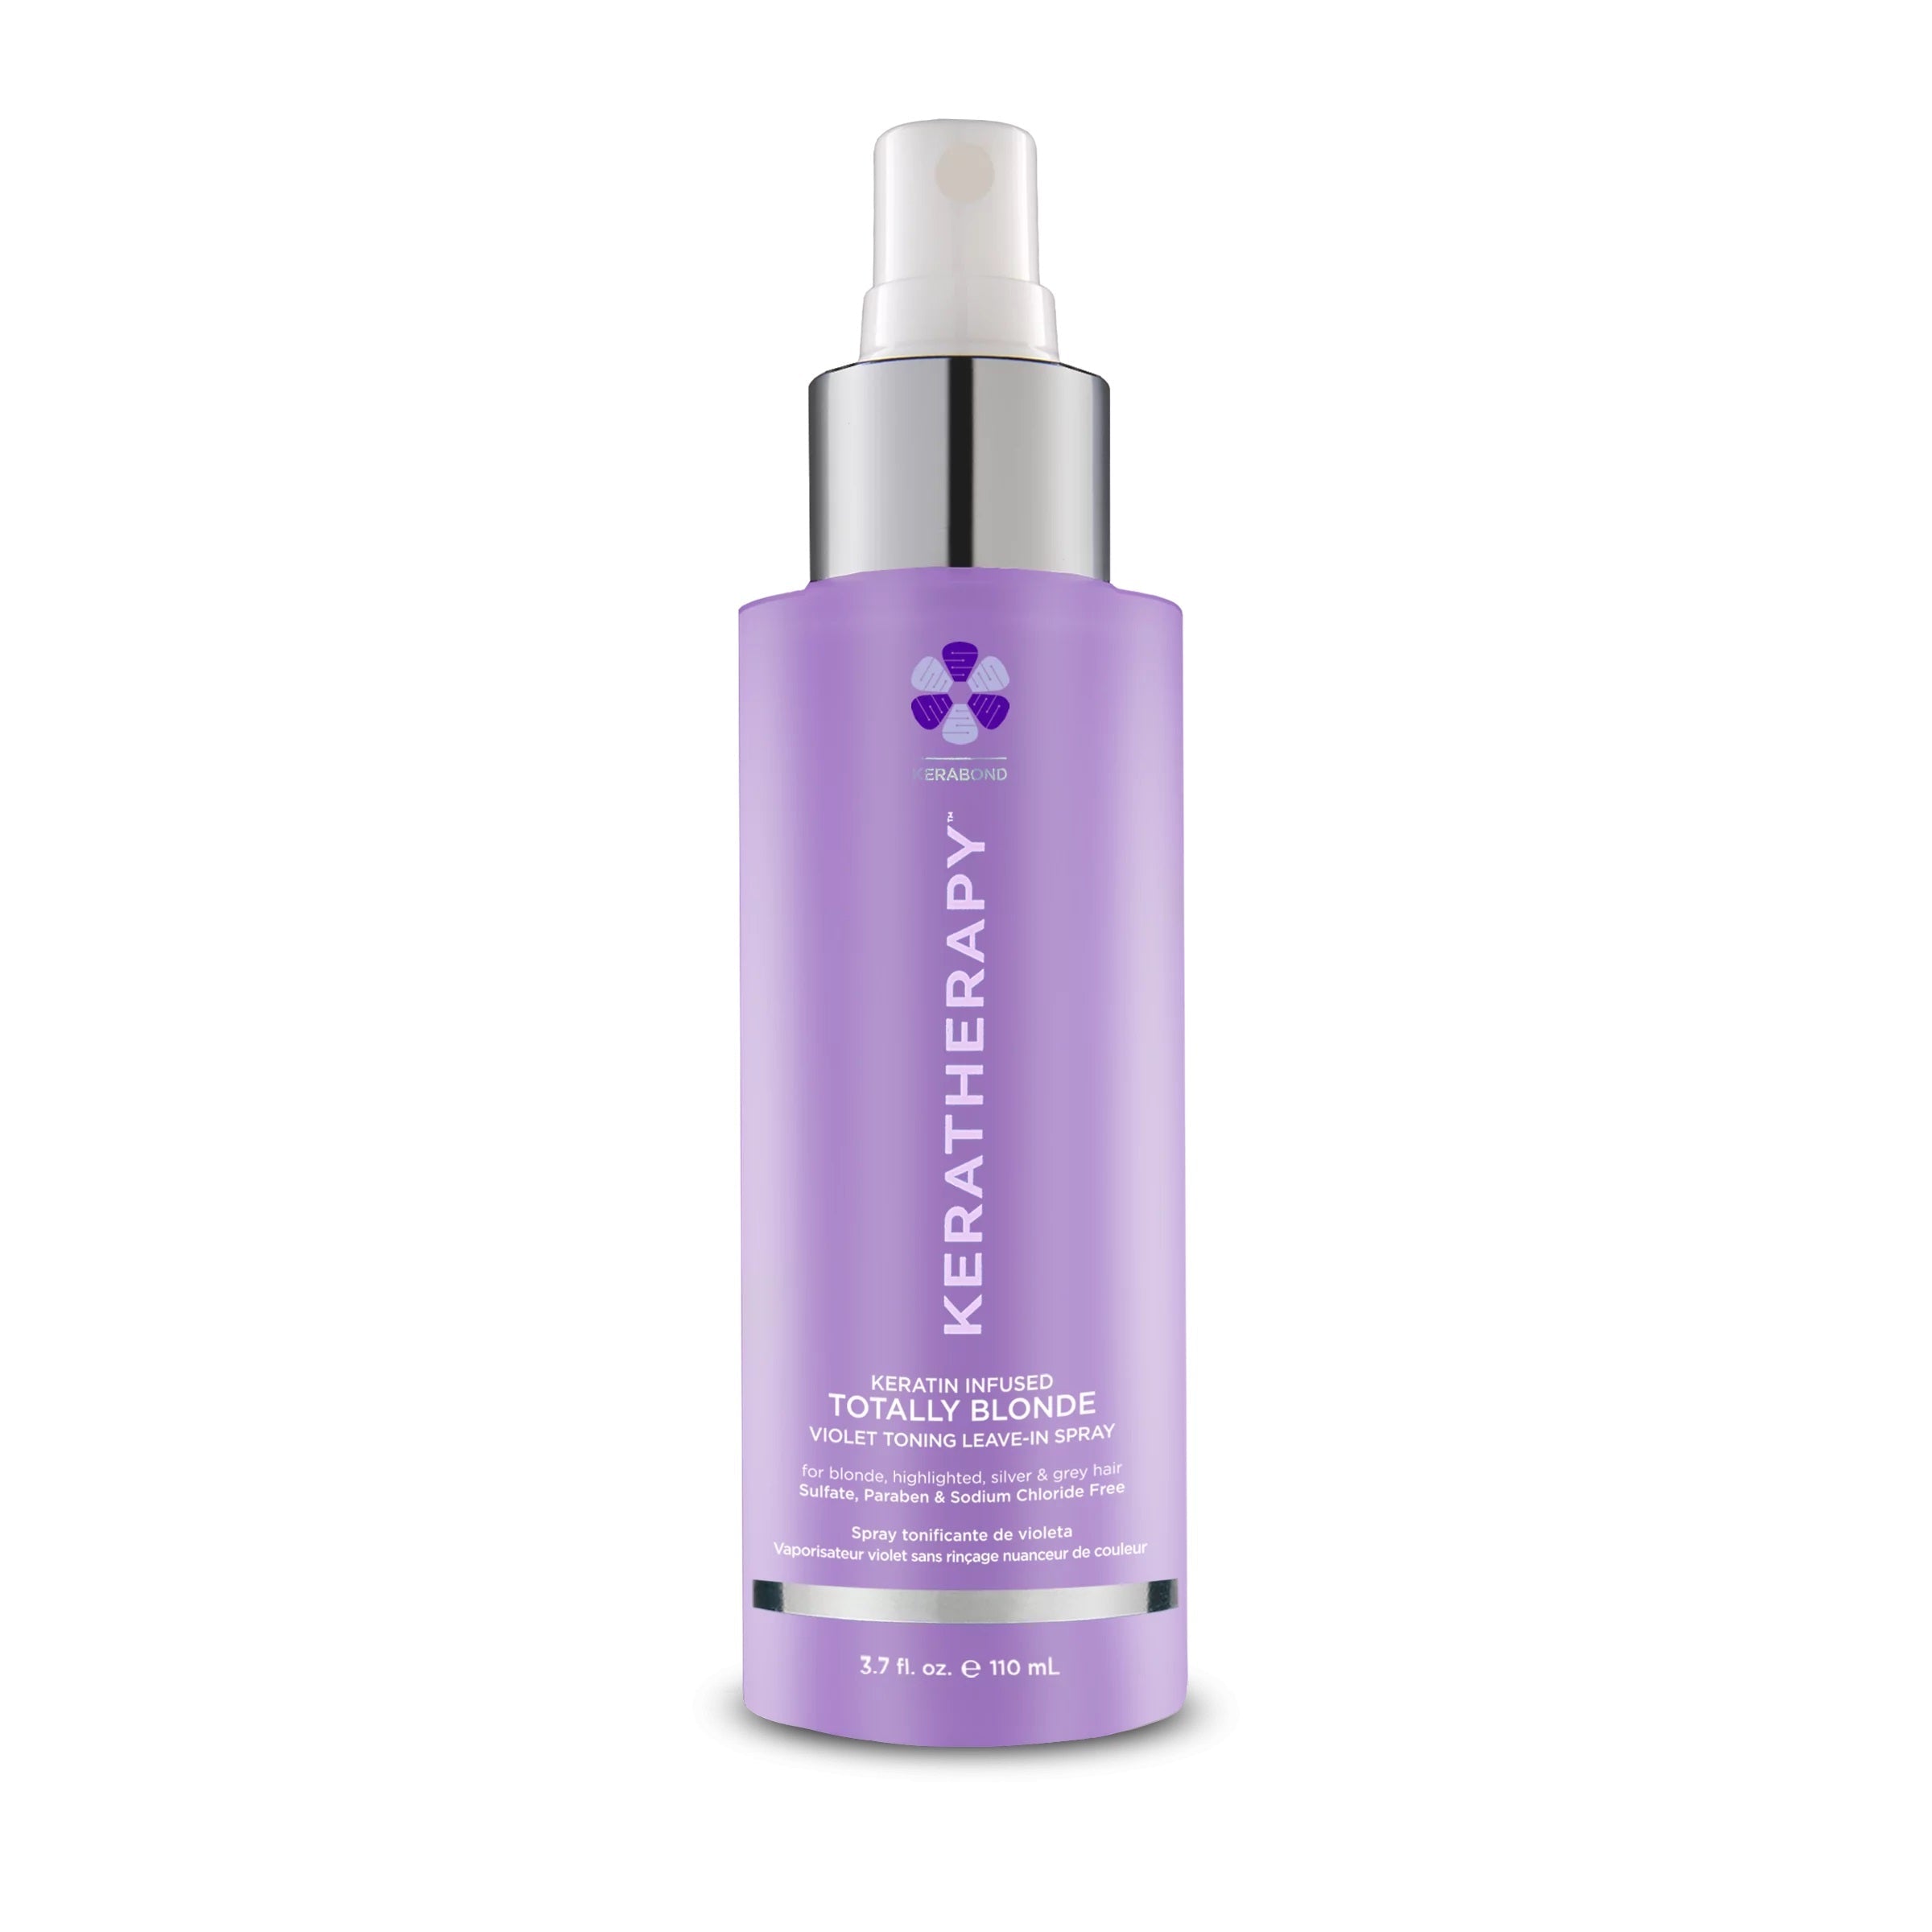 Totally Blonde Violet Toning Leave-in Conditioner Spray